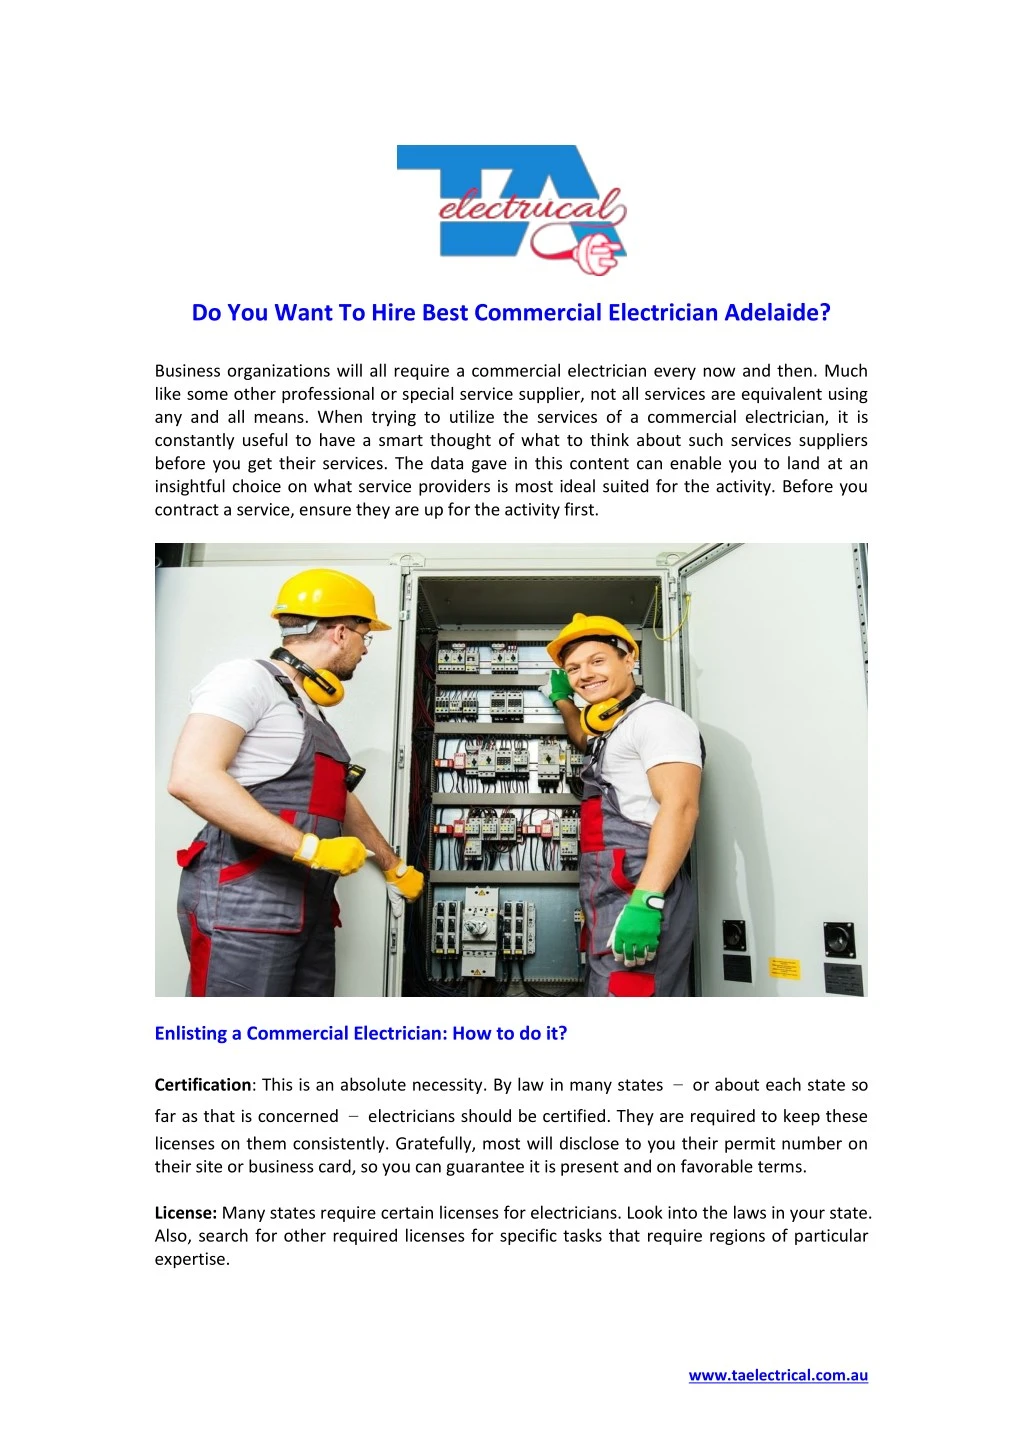 do you want to hire best commercial electrician